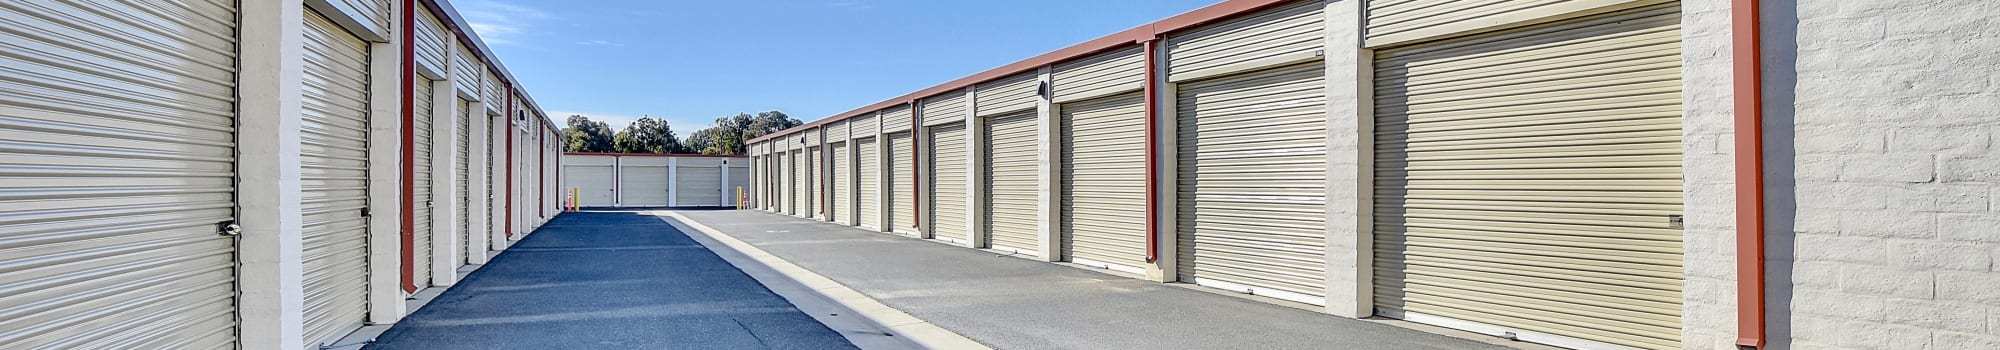 Accessibility statement for My Self Storage Space in Camarillo, California